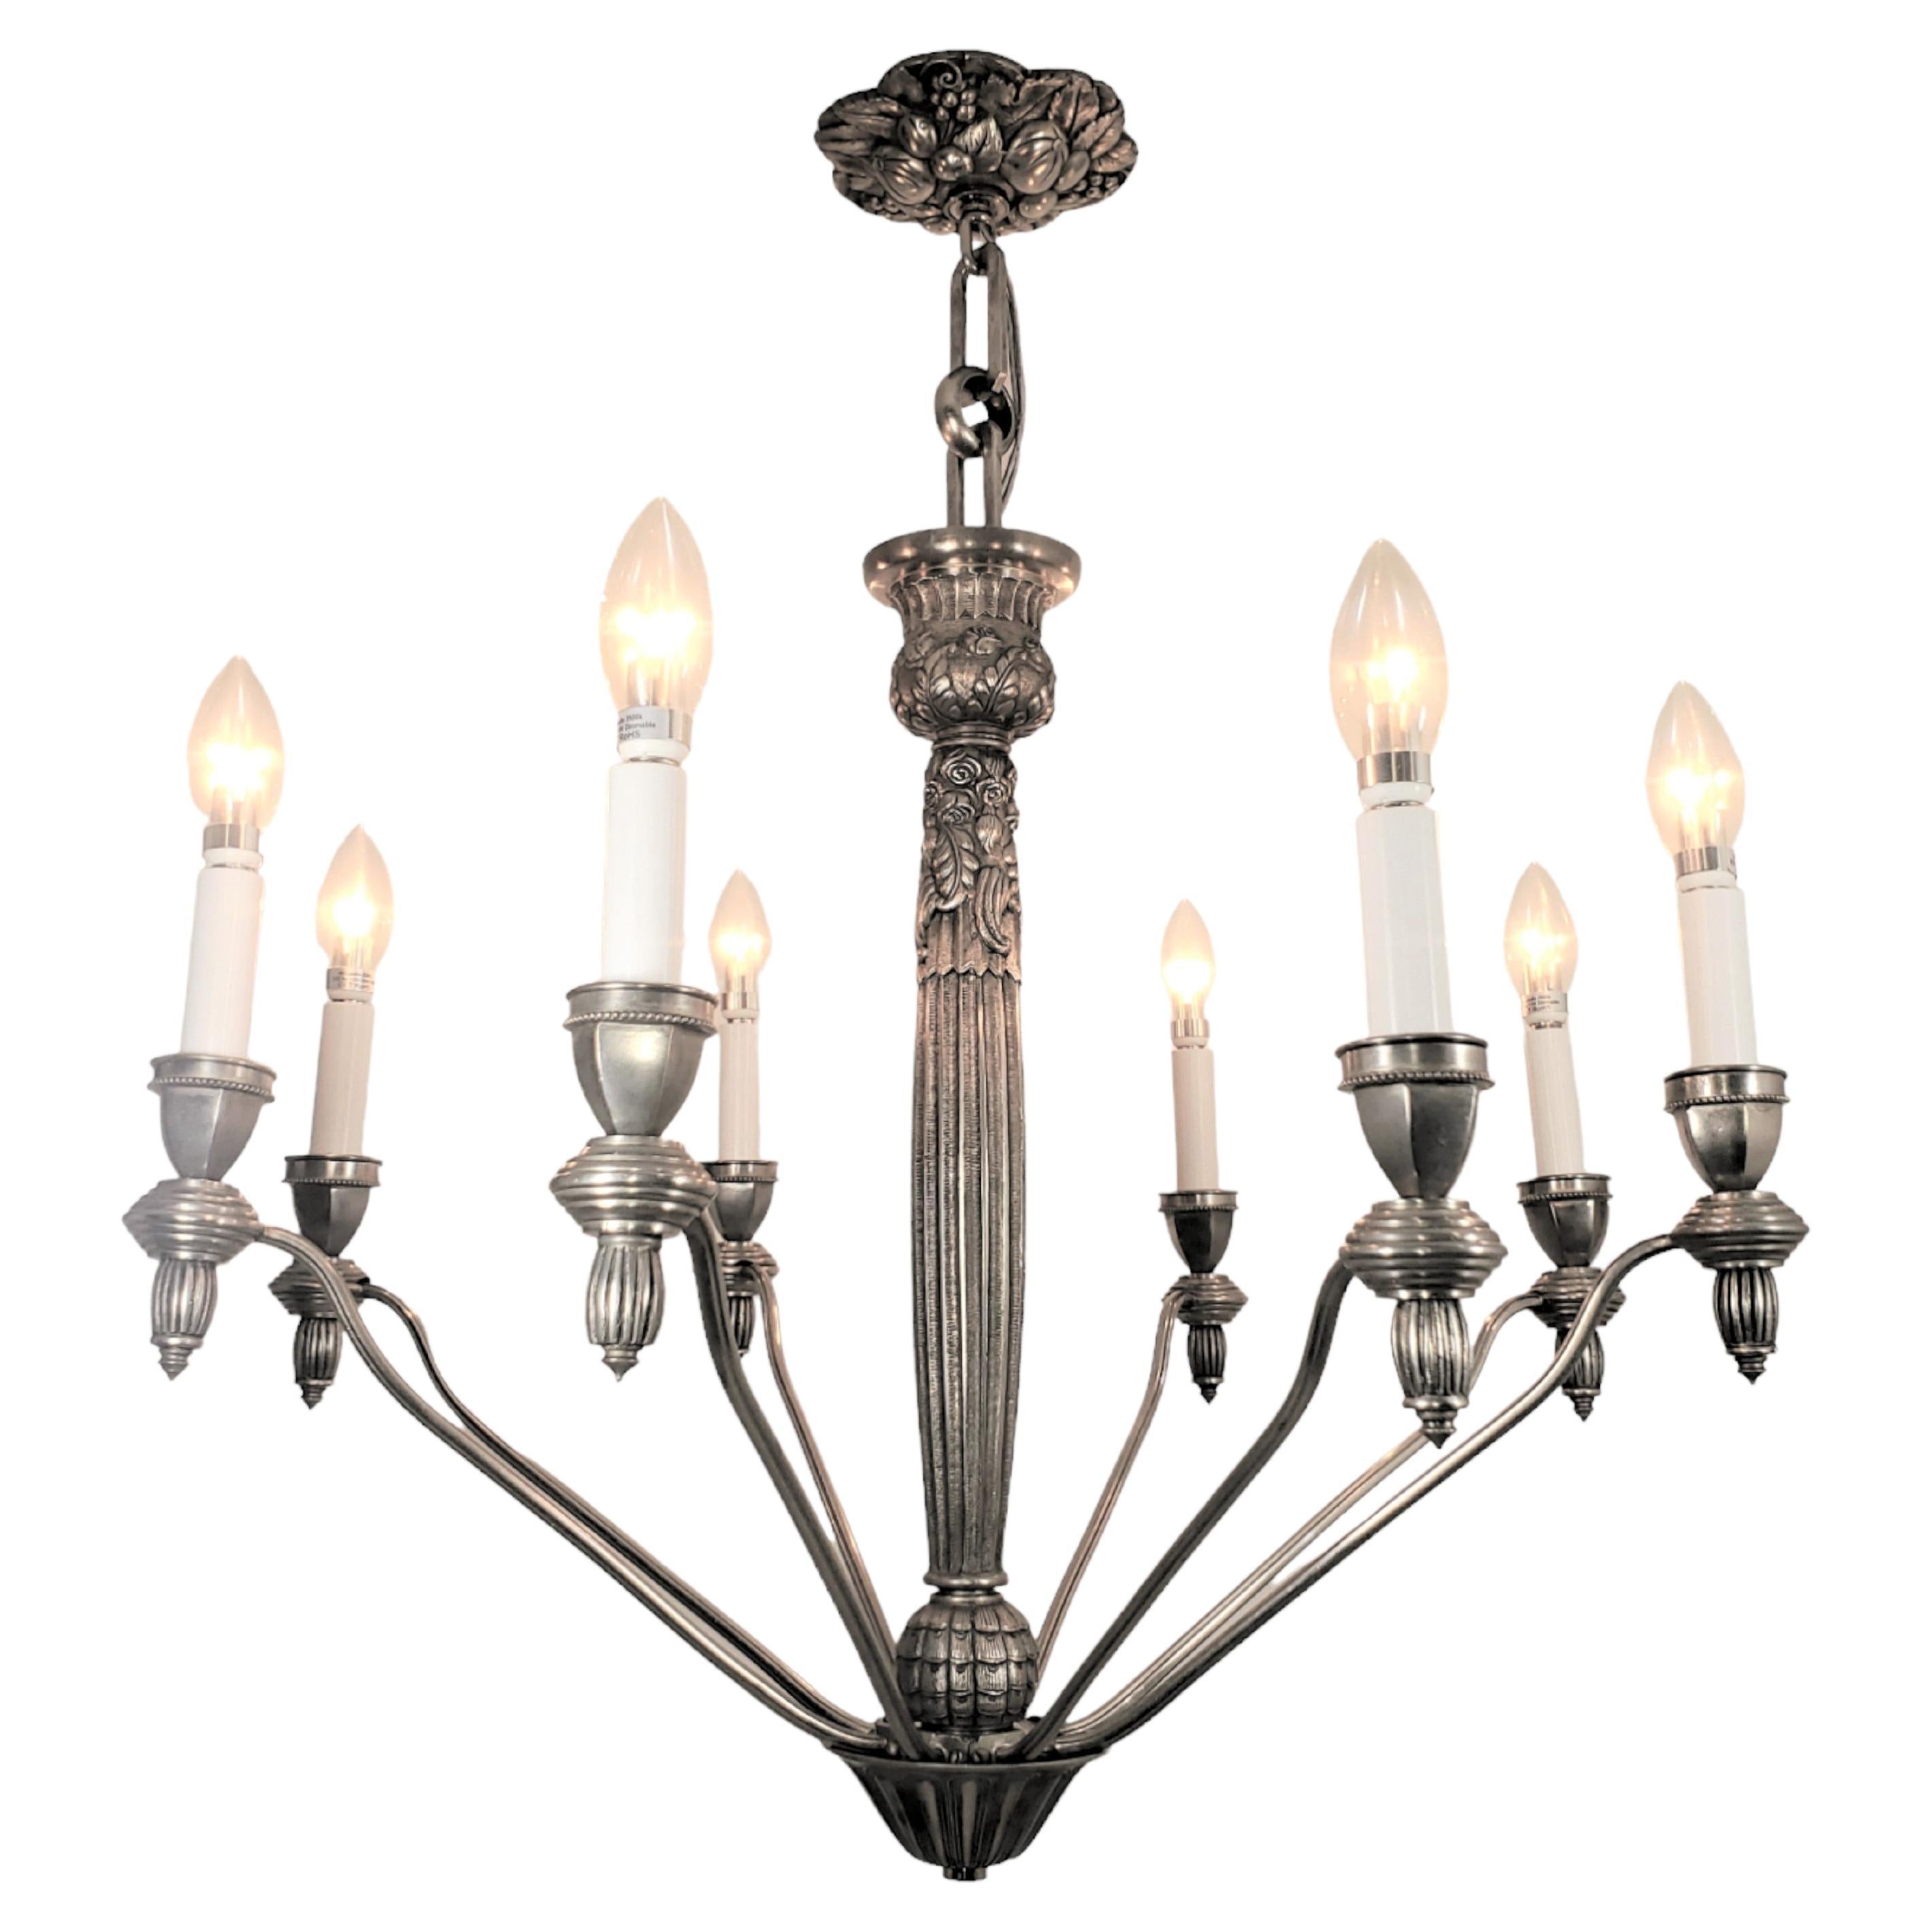 French eight arm heavily cast and detailed nickeled bronze chandelier - G.Capon  For Sale 7